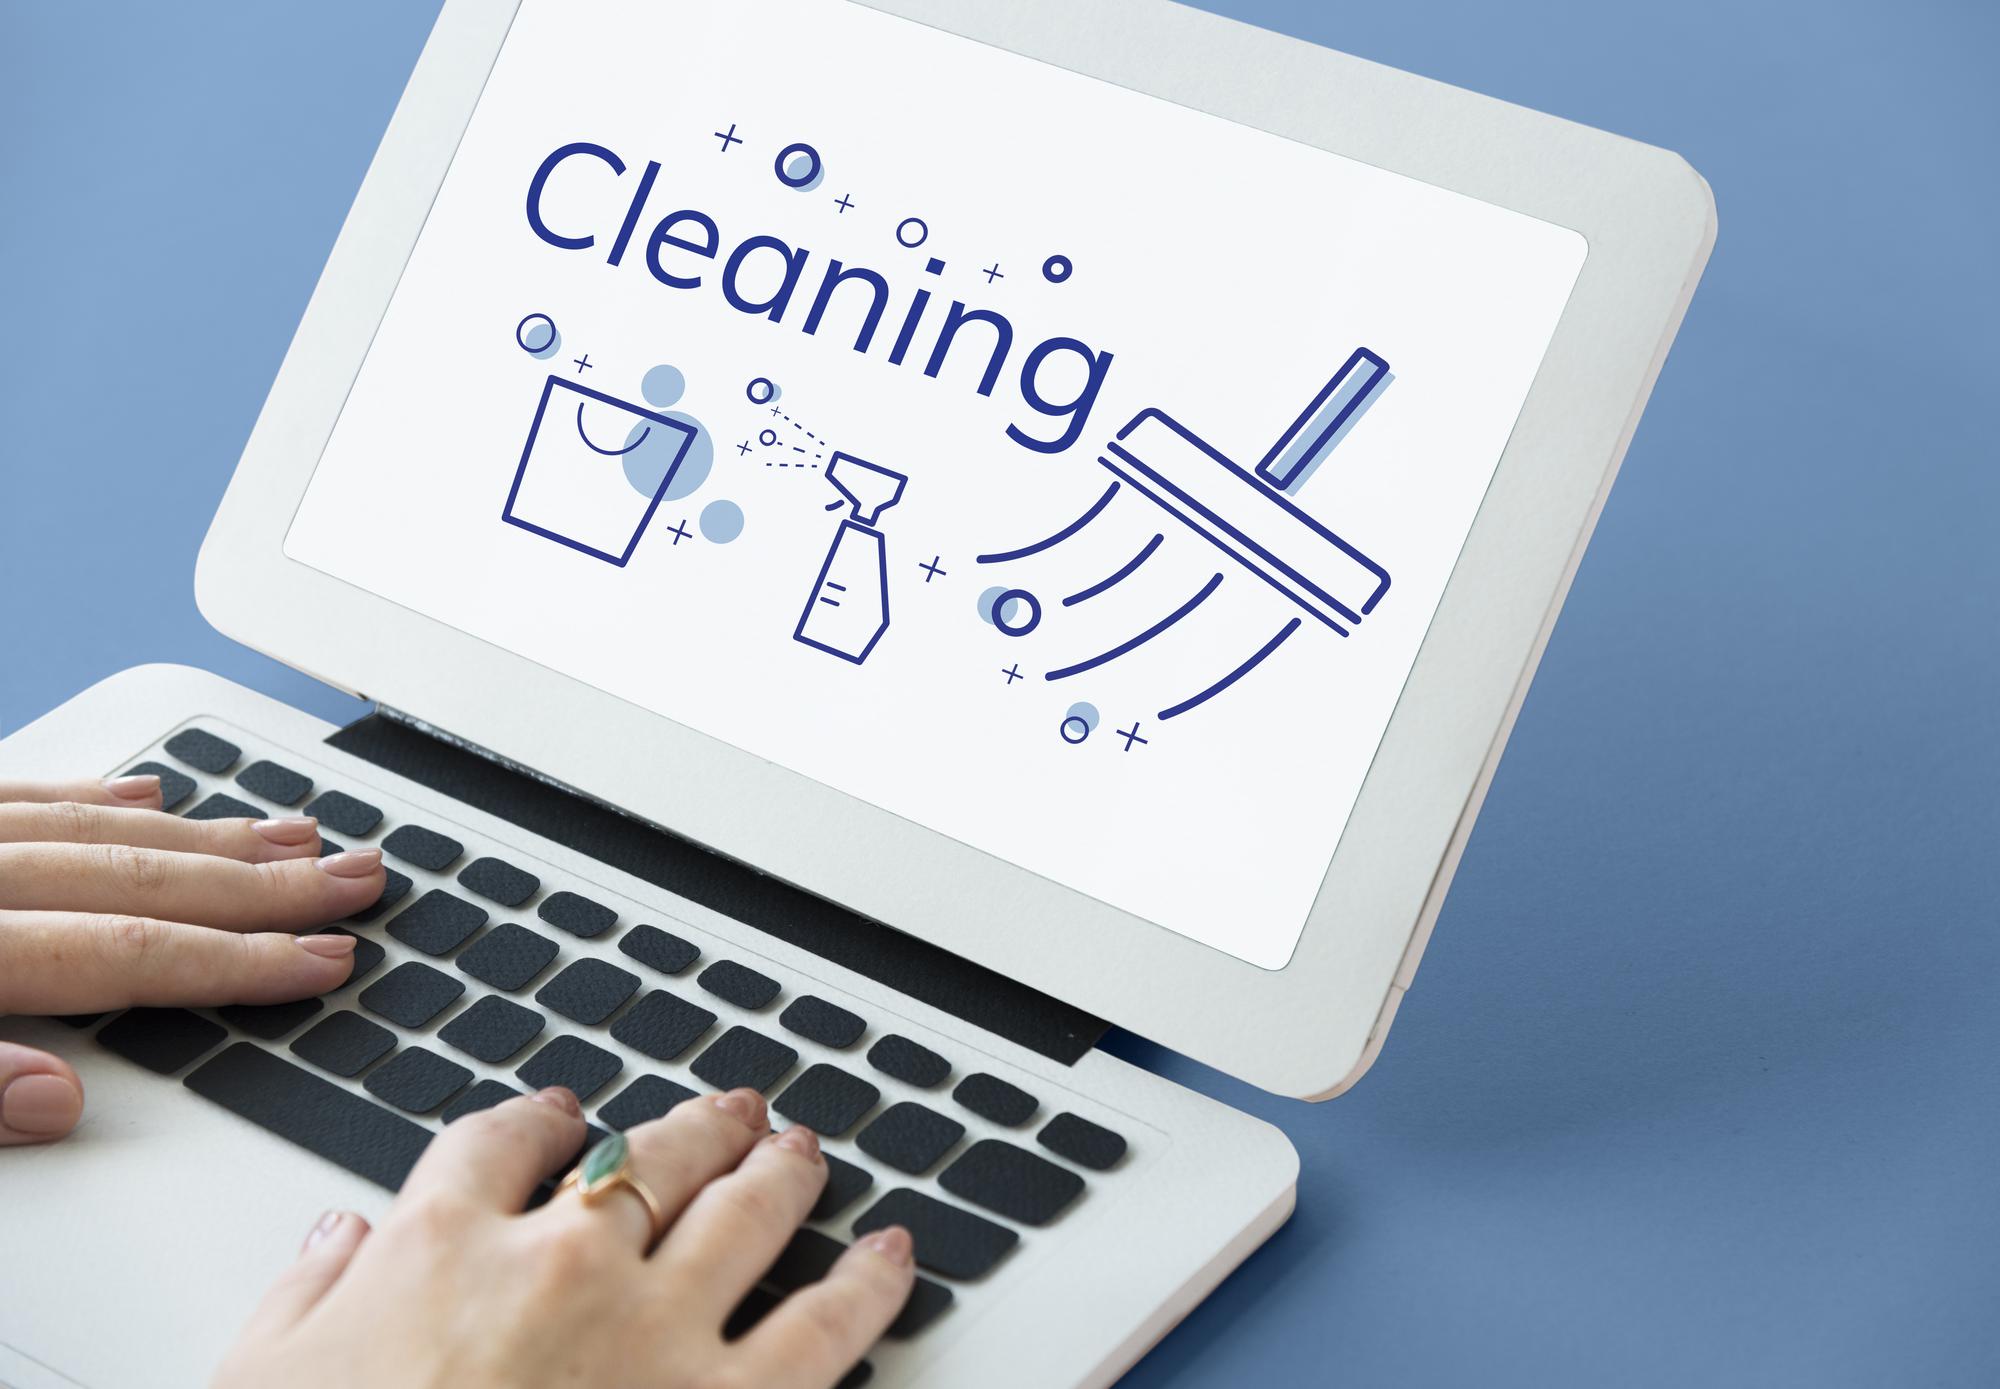 7 Of The Best Android Cleaner Apps To Maintain A Clean Device